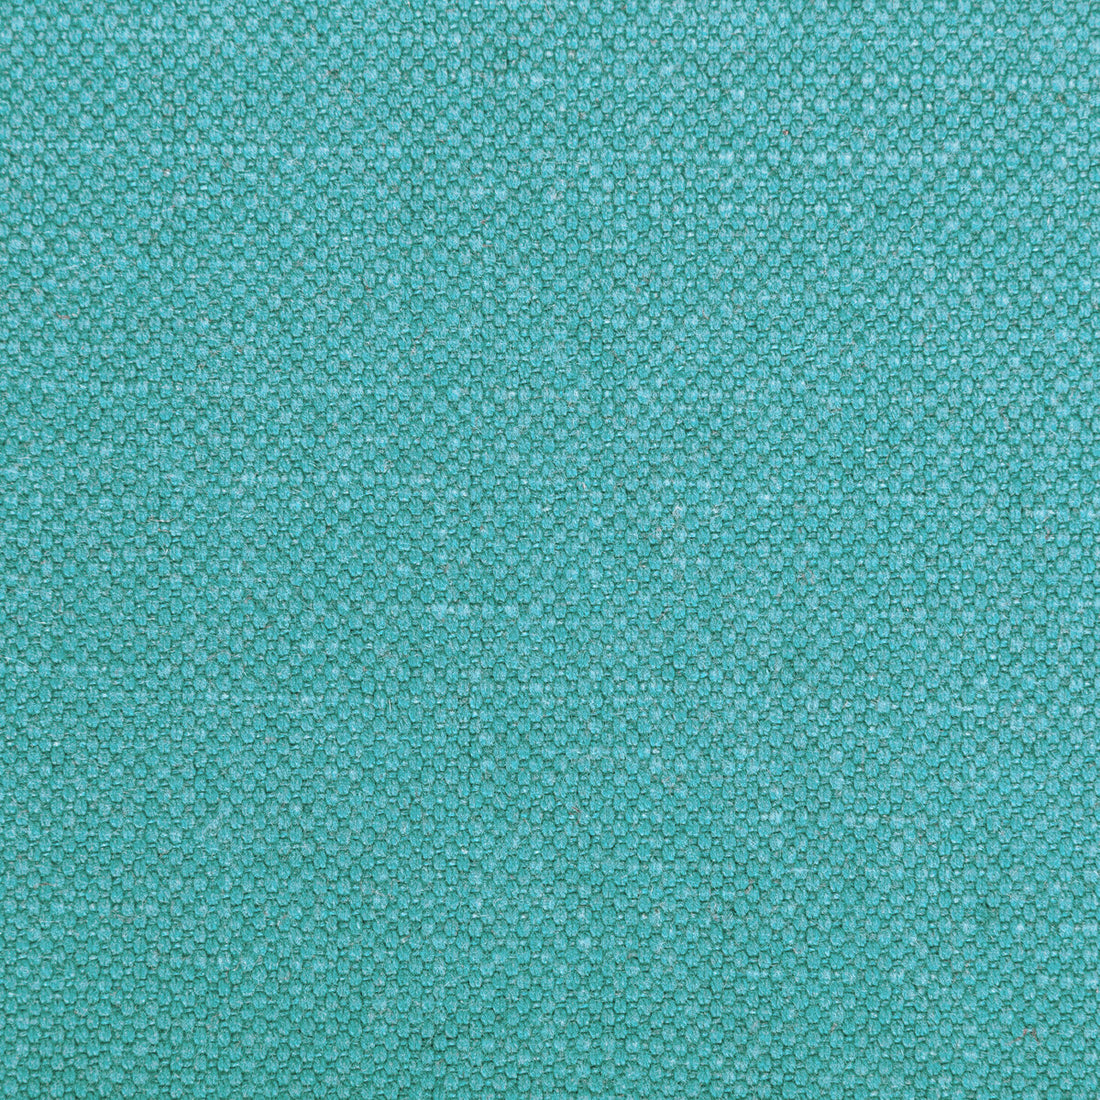 Carson fabric in surf color - pattern 36282.1315.0 - by Kravet Basics